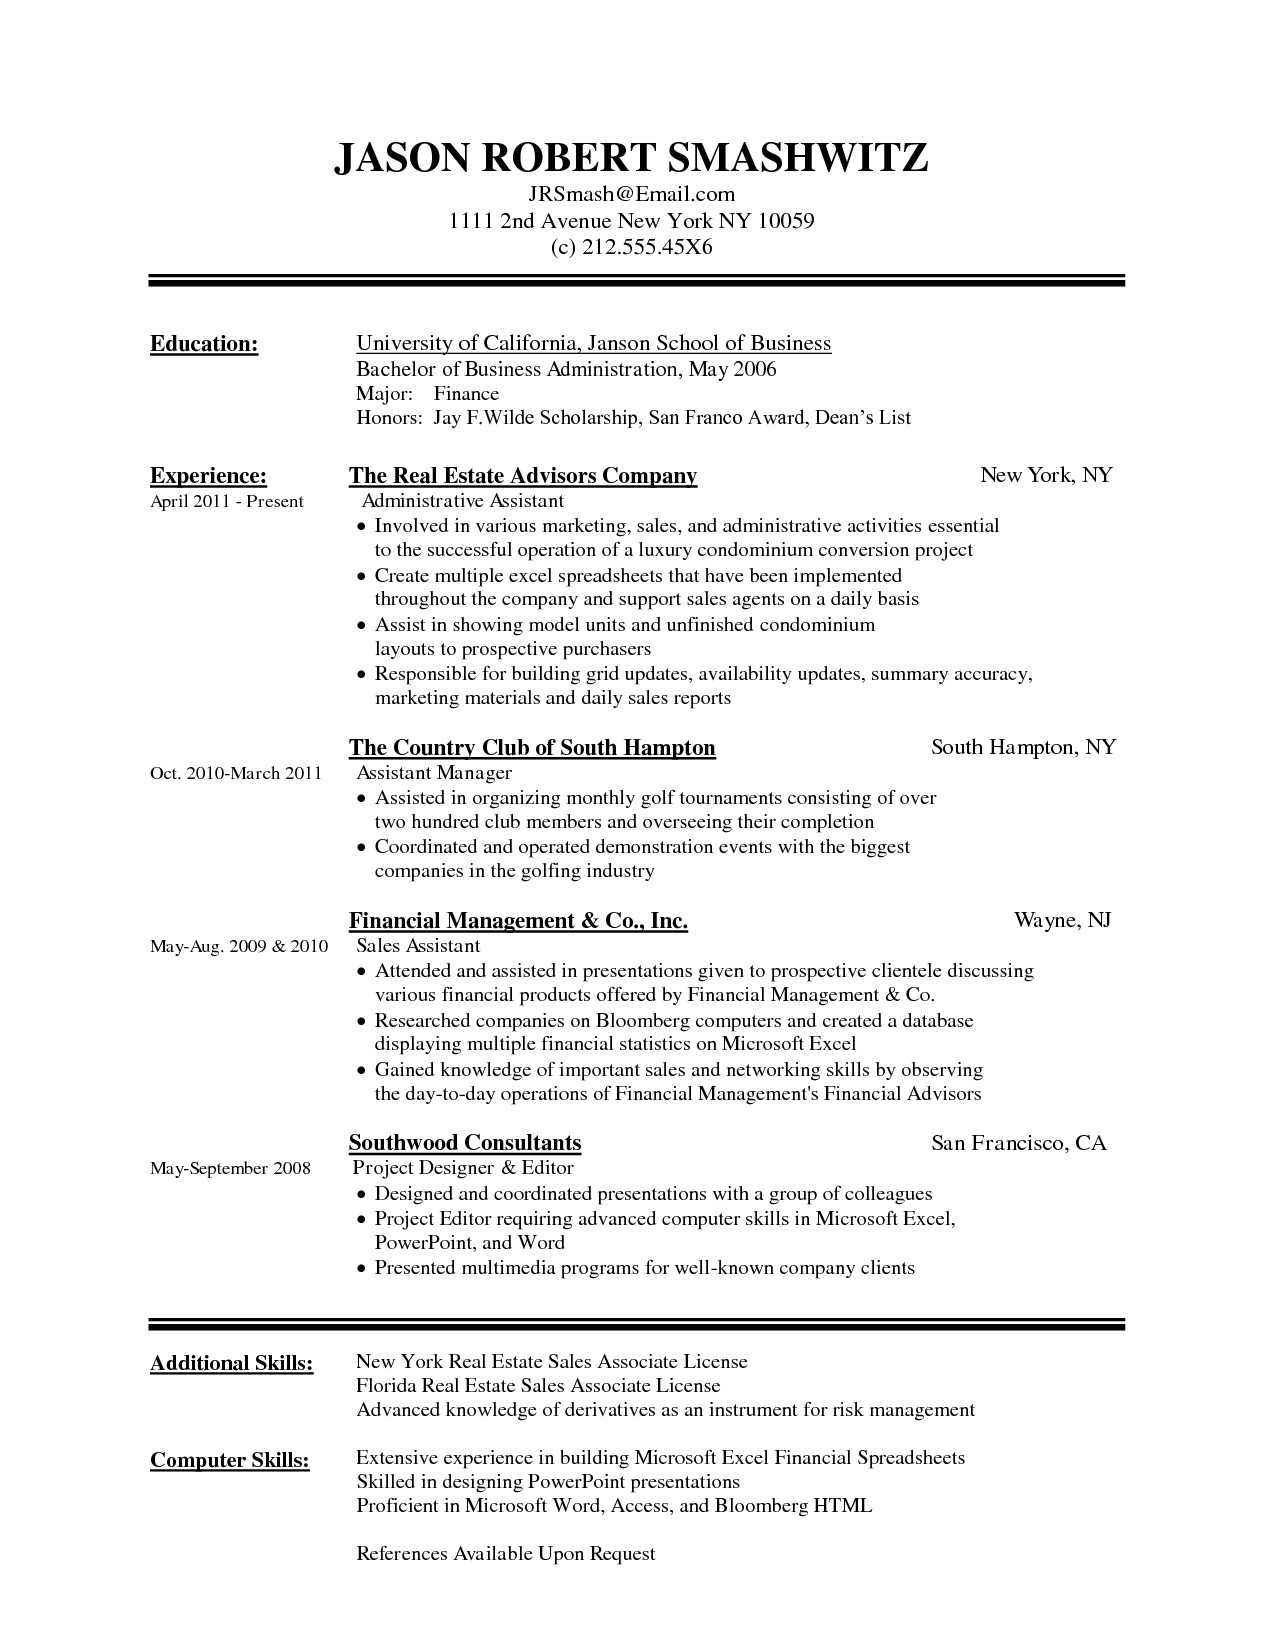 Awesome Resume Templates For Word 2010 – Superkepo Intended For Resume Templates Microsoft Word 2010